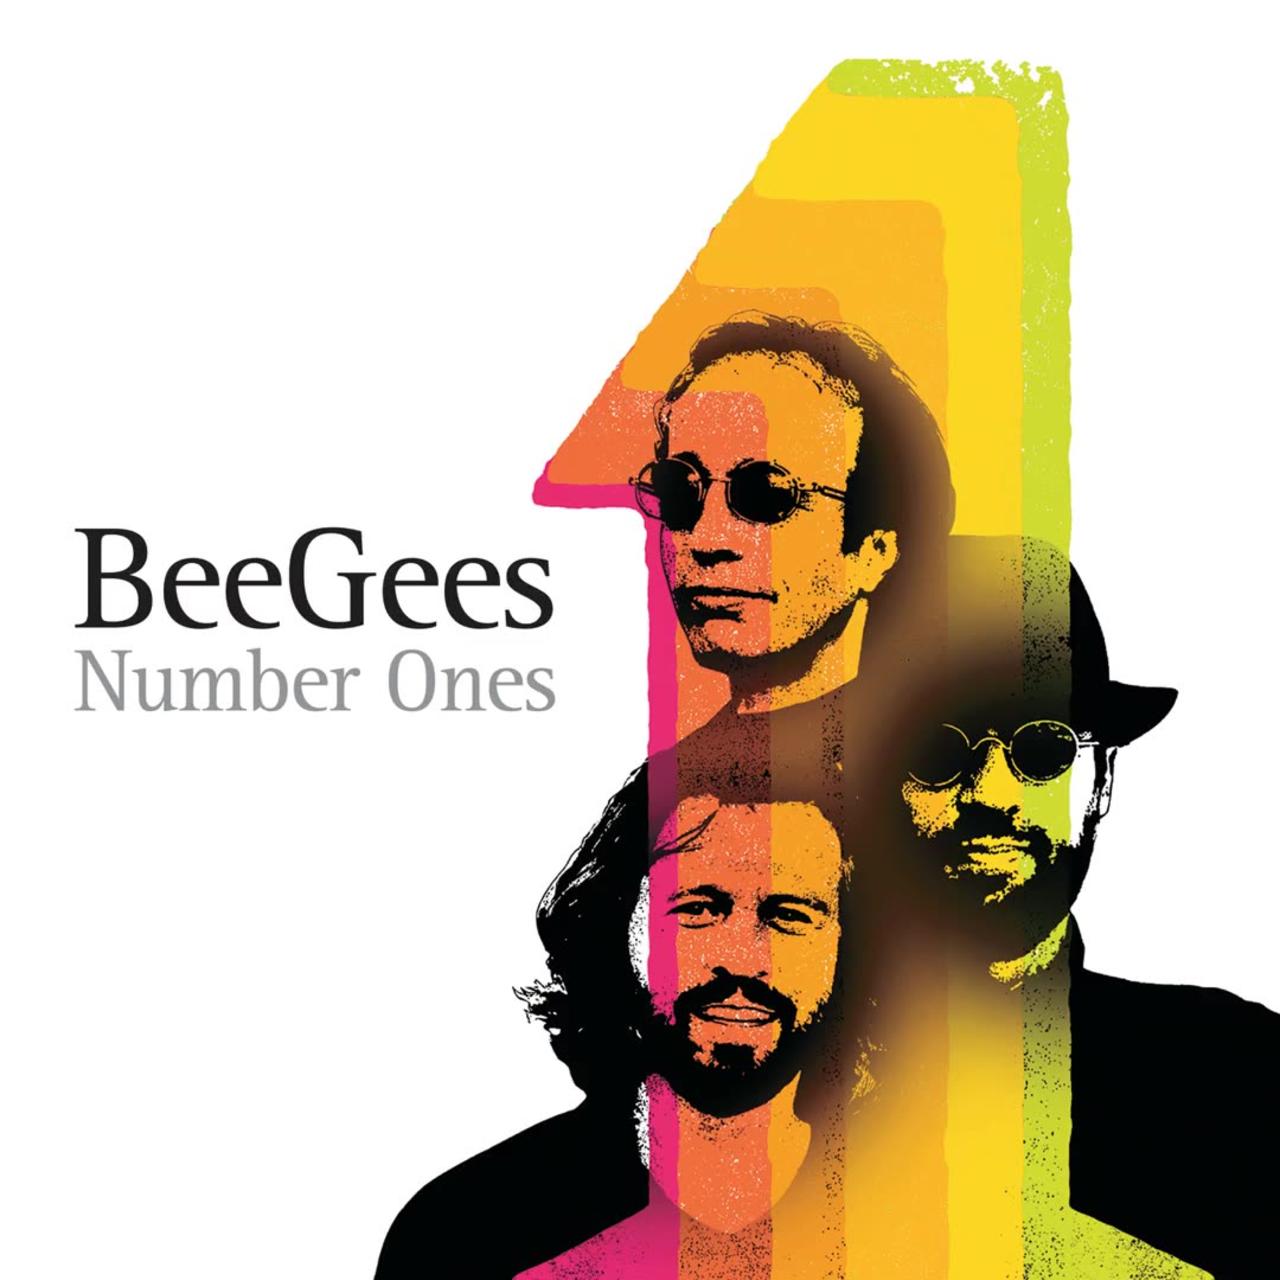 BeeGees - Number One